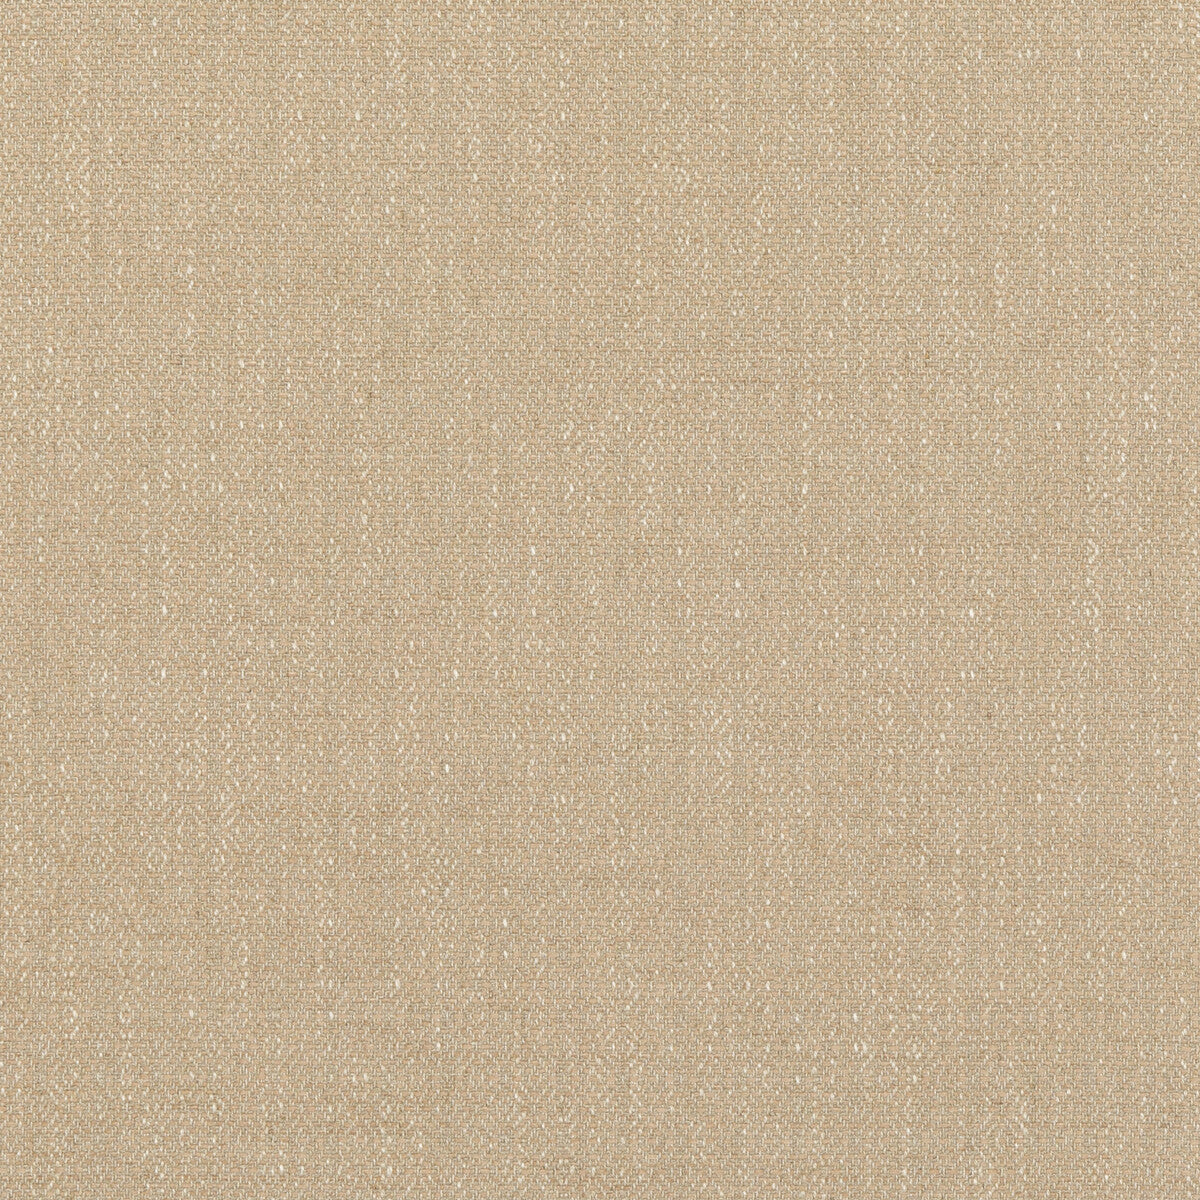 Kenton fabric in parchment color - pattern BF10868.225.0 - by G P &amp; J Baker in the Essential Colours II collection